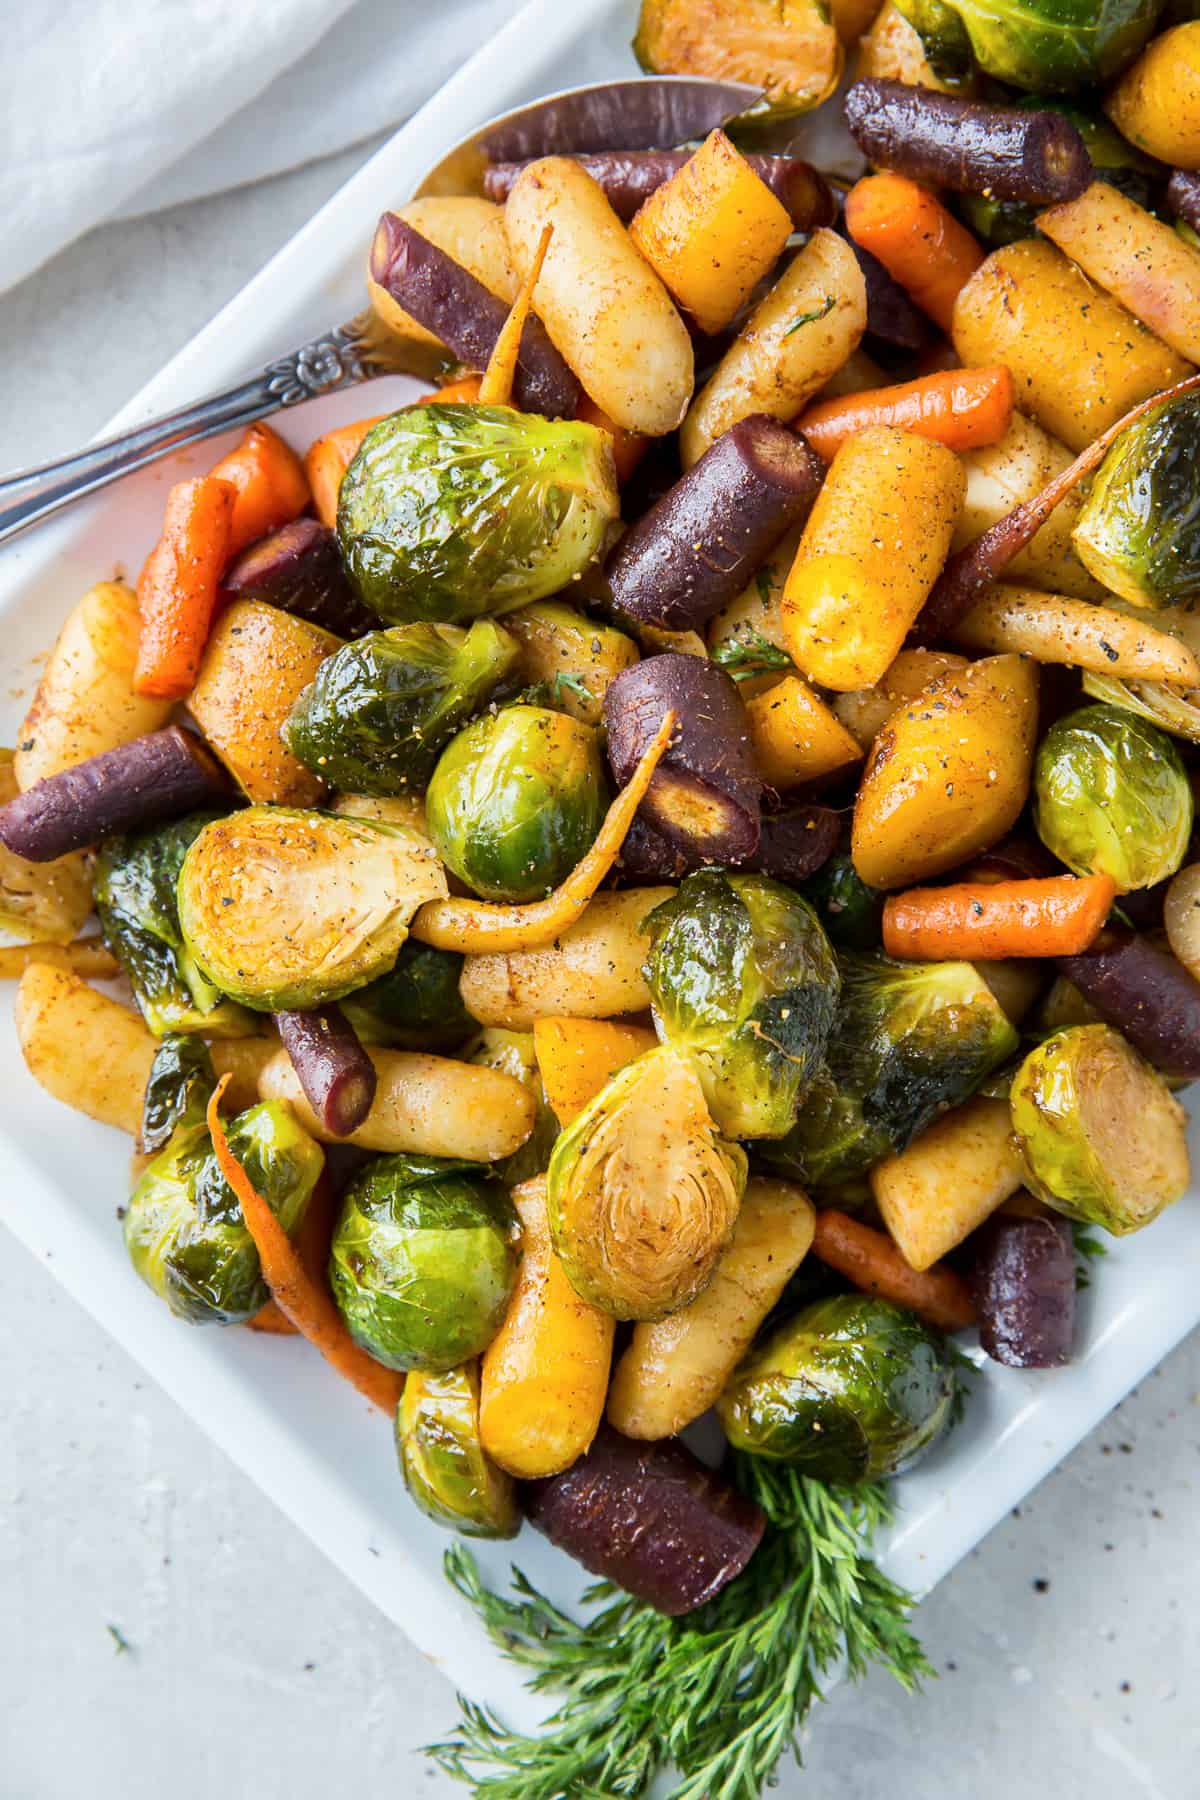 Roasted rainbow carrots and Brussels sprouts on a white platter.